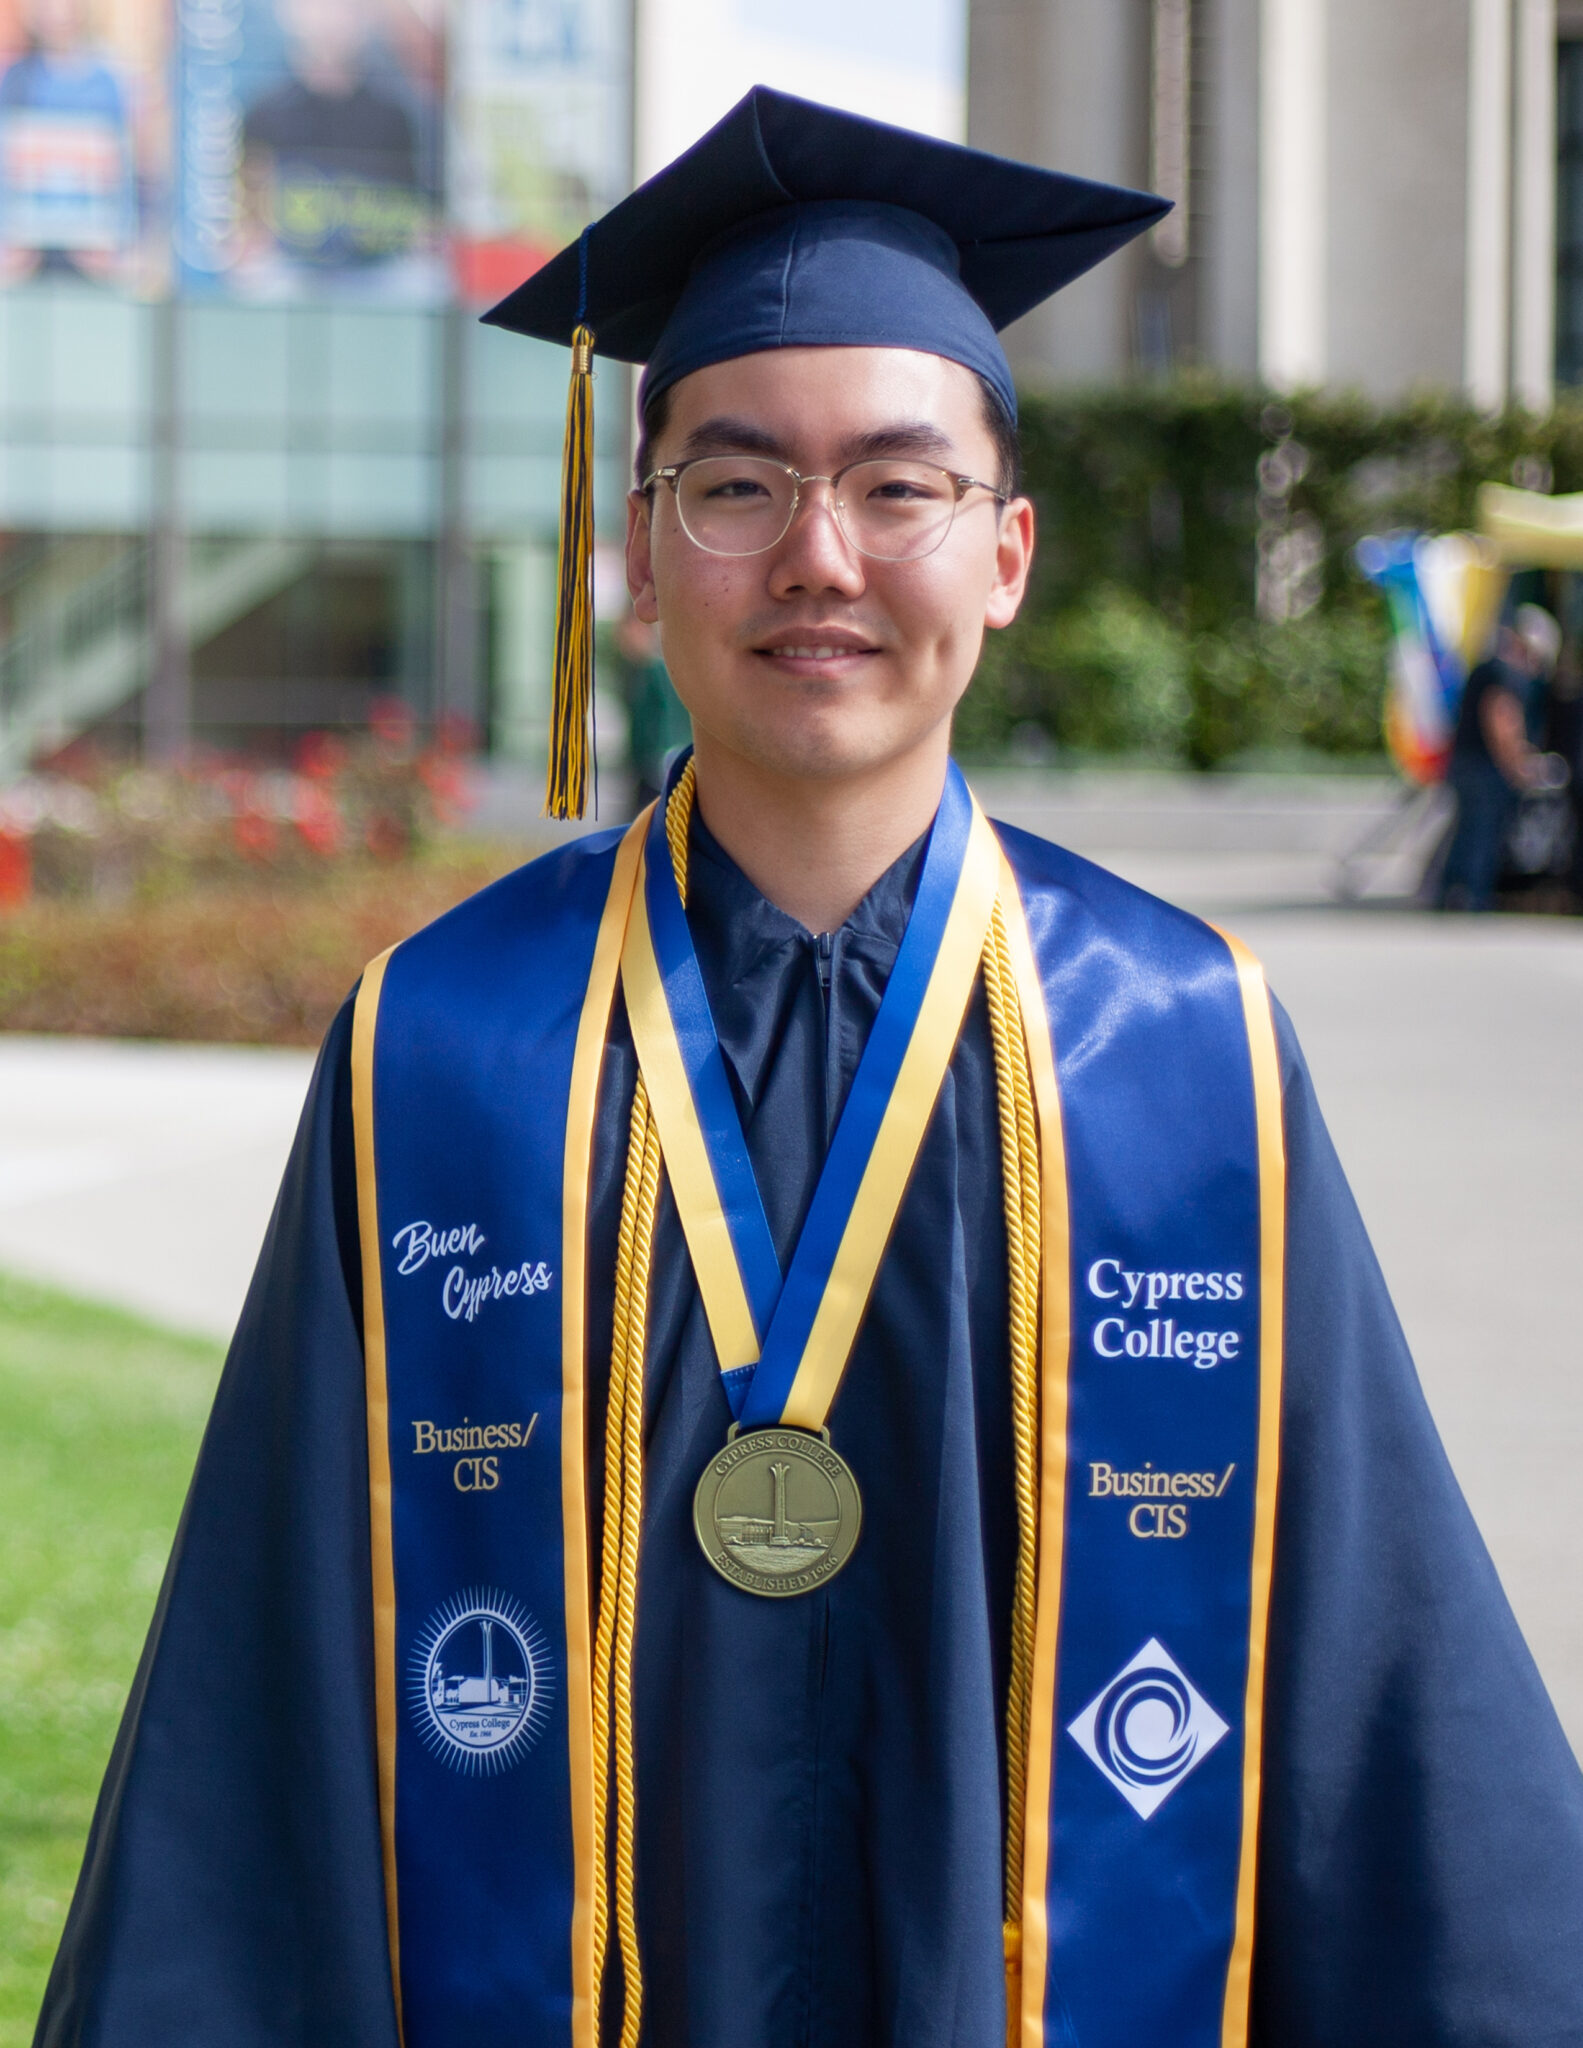 Portrait of Jesse Chang, the 2023 Presidential Scholar of Distinction for the Business/CIS pathway, wearing regalia with Gateway Plaza in the background